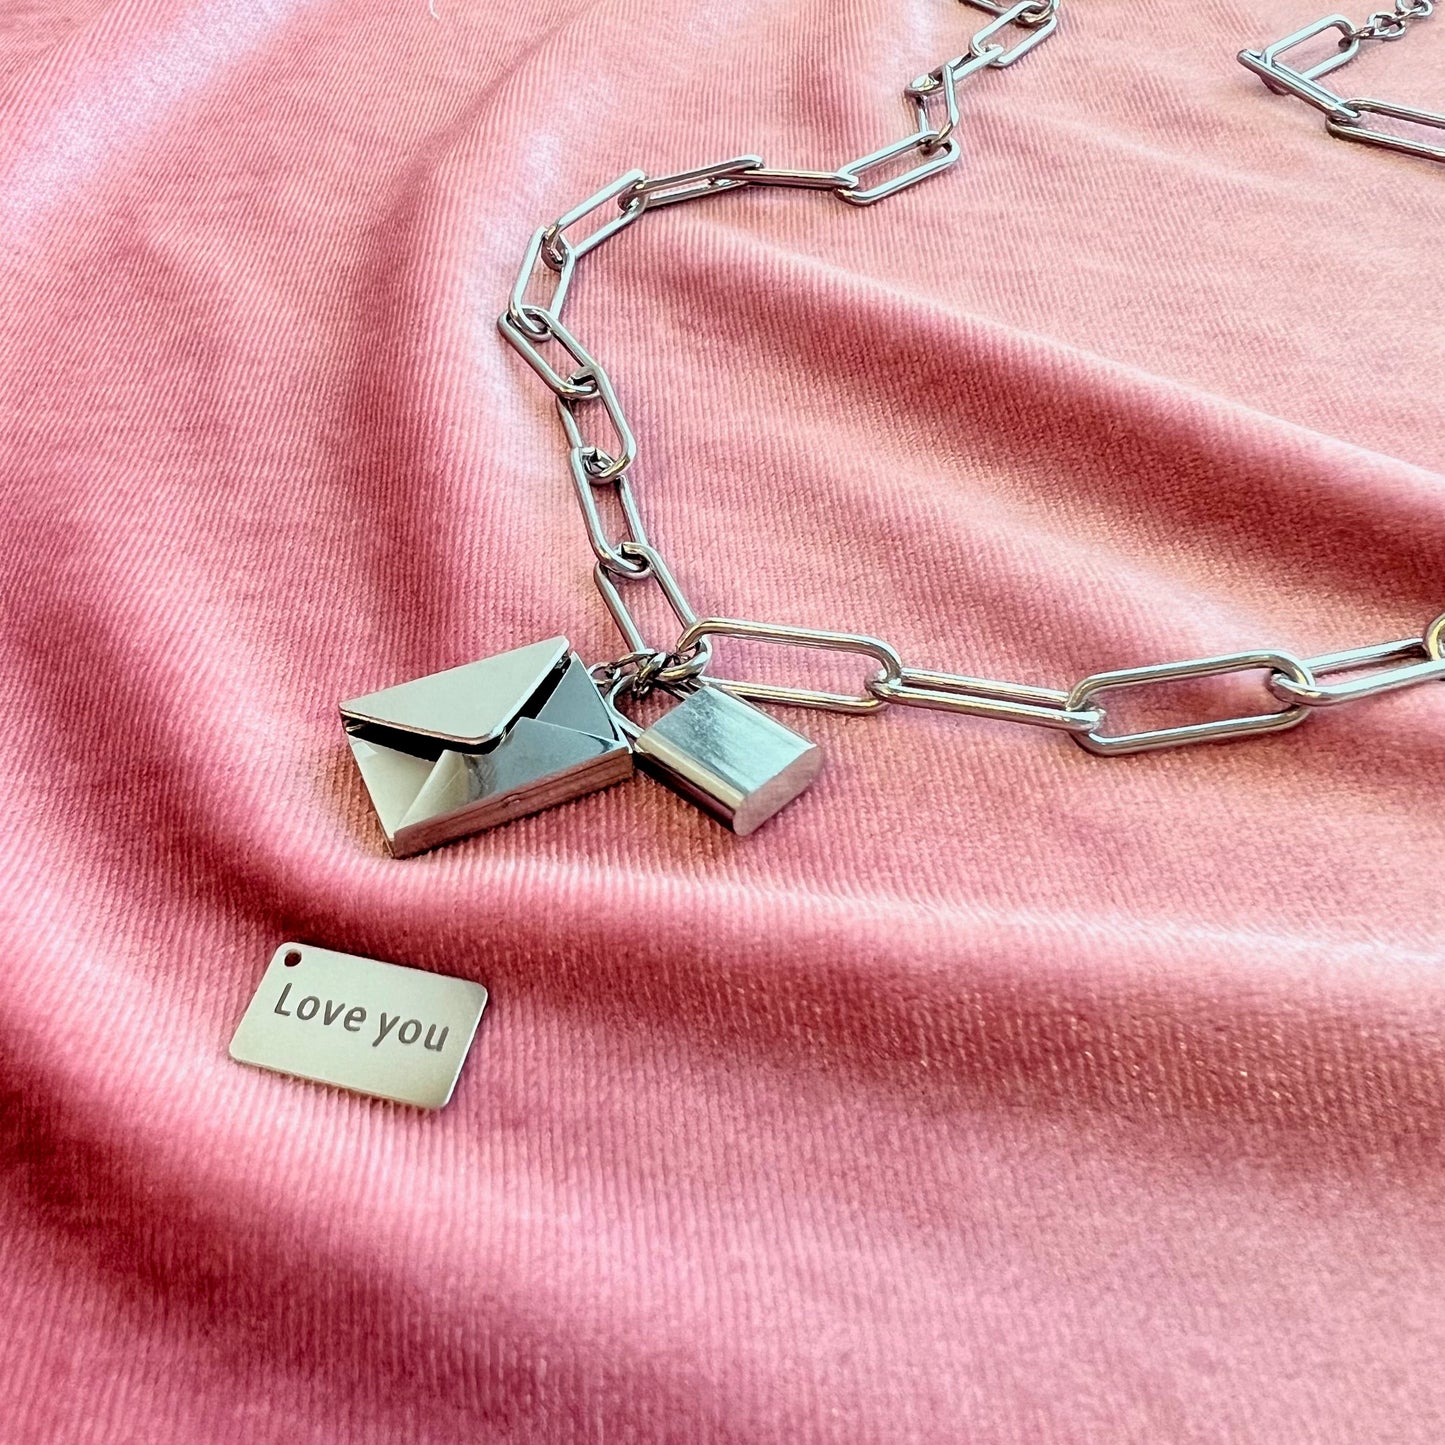 A LETTER FOR YOU NECKLACE